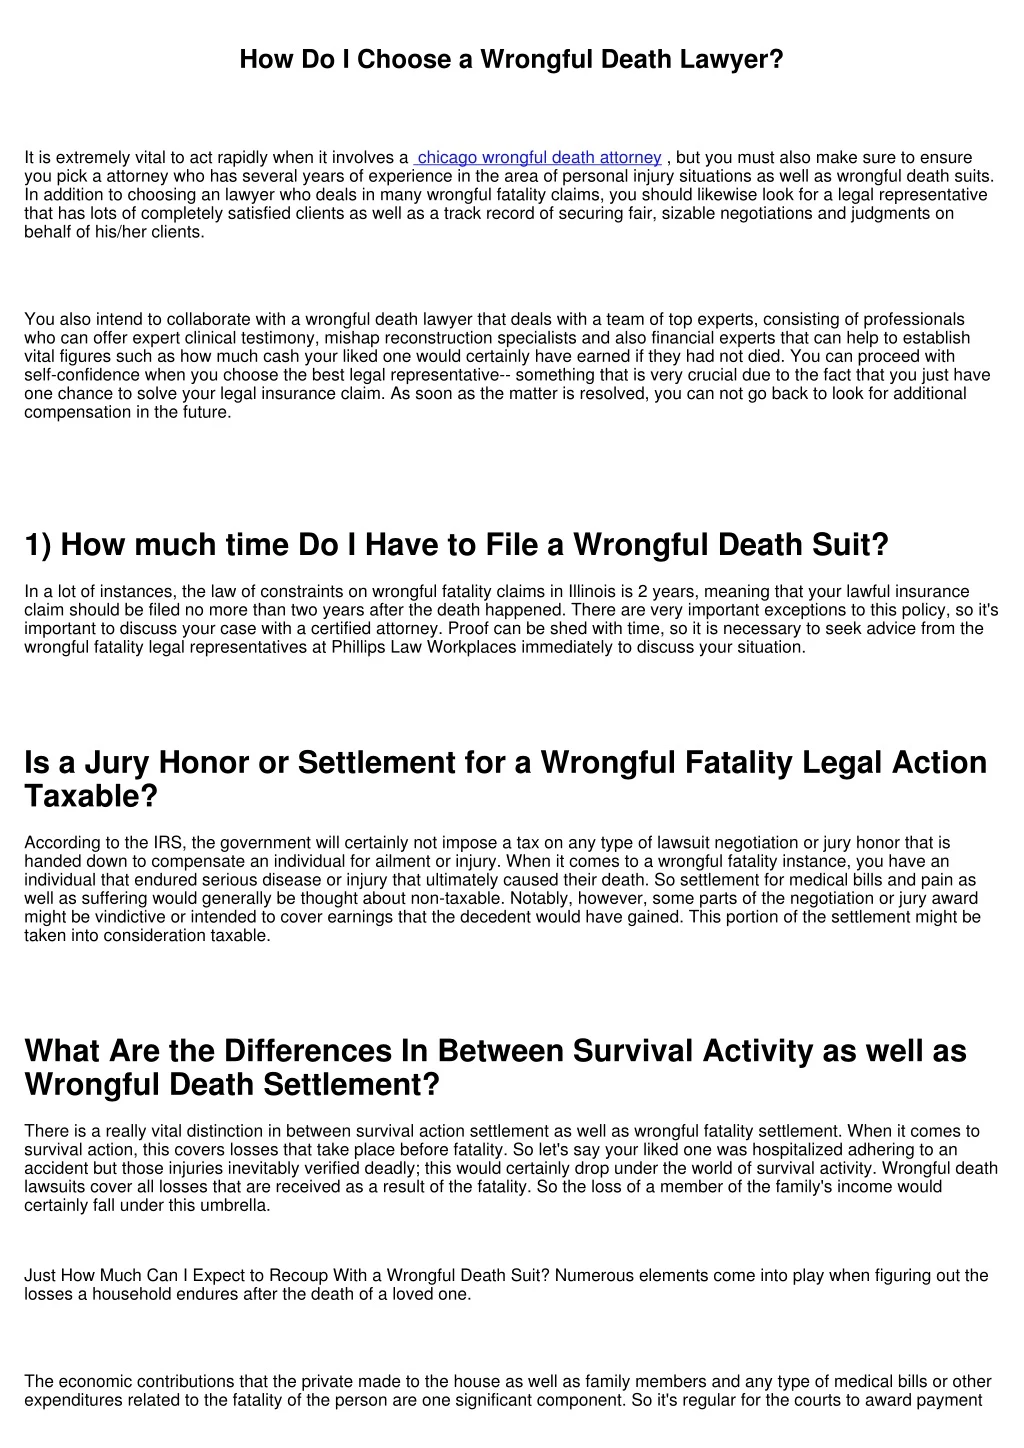 how do i choose a wrongful death lawyer